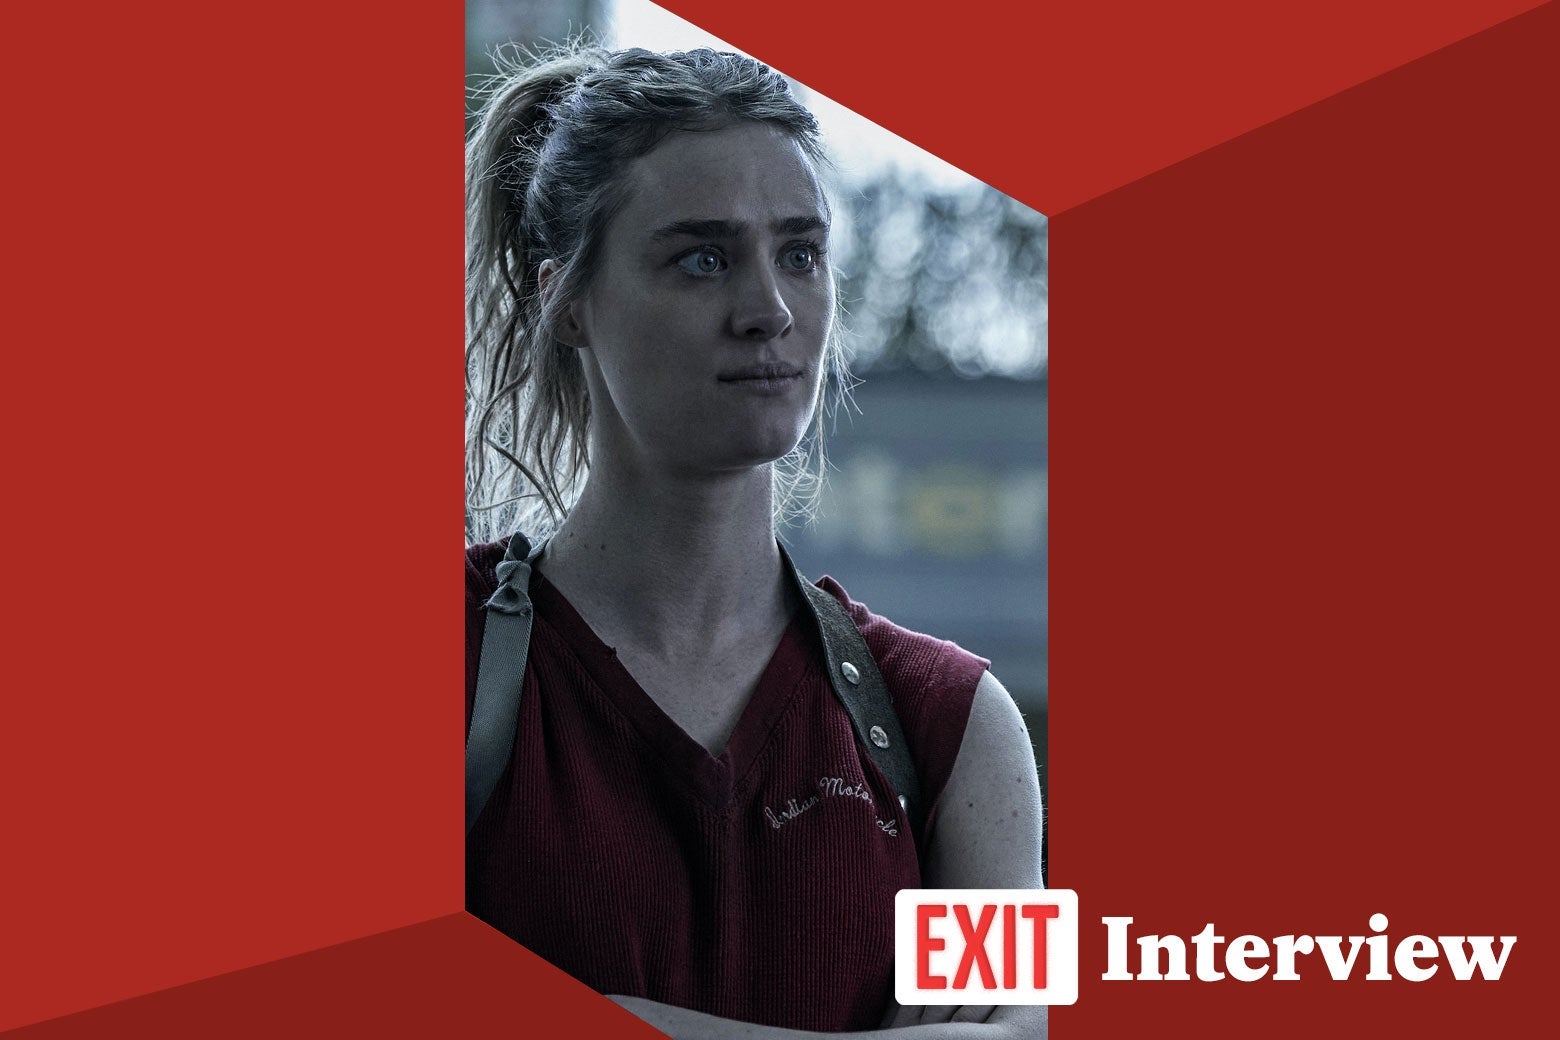 She stands tall with her blonde hair tied back and a bag over her shoulders. In front her, the logo "Exit Interview."